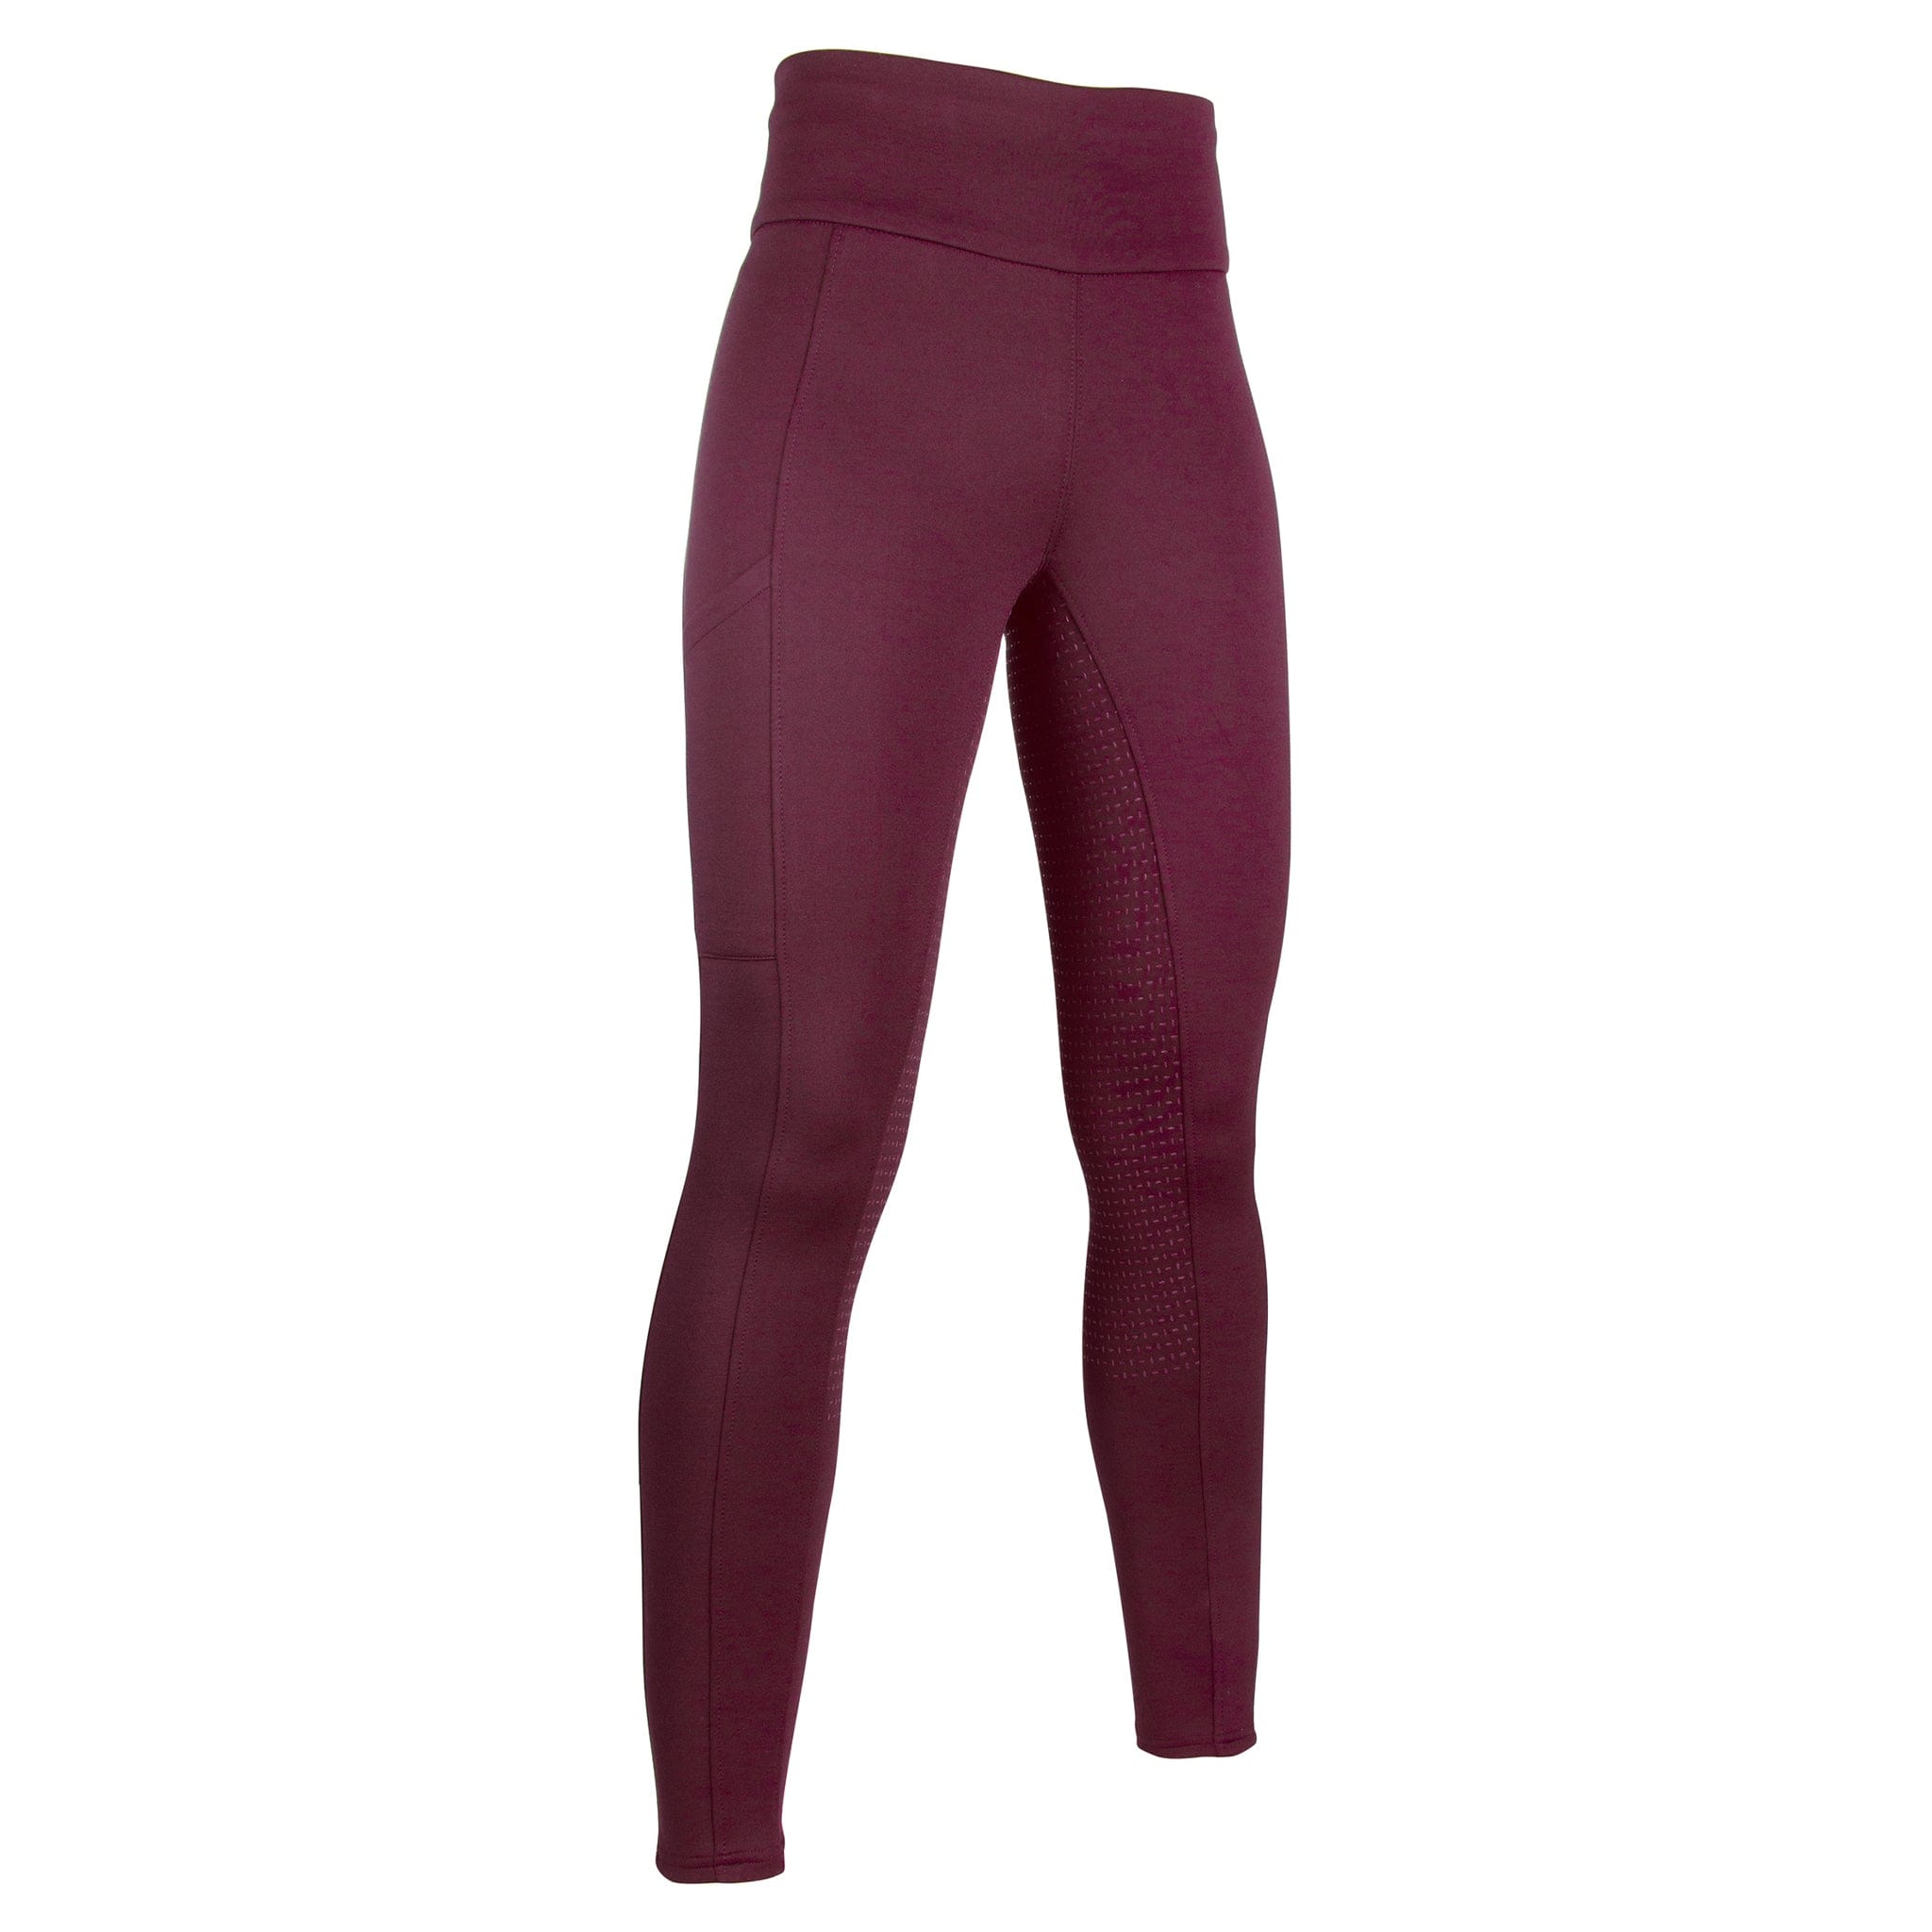 HKM Style Children's Cosy Silicone Full Seat Riding Tights 12964 Burgundy Wine Red Front